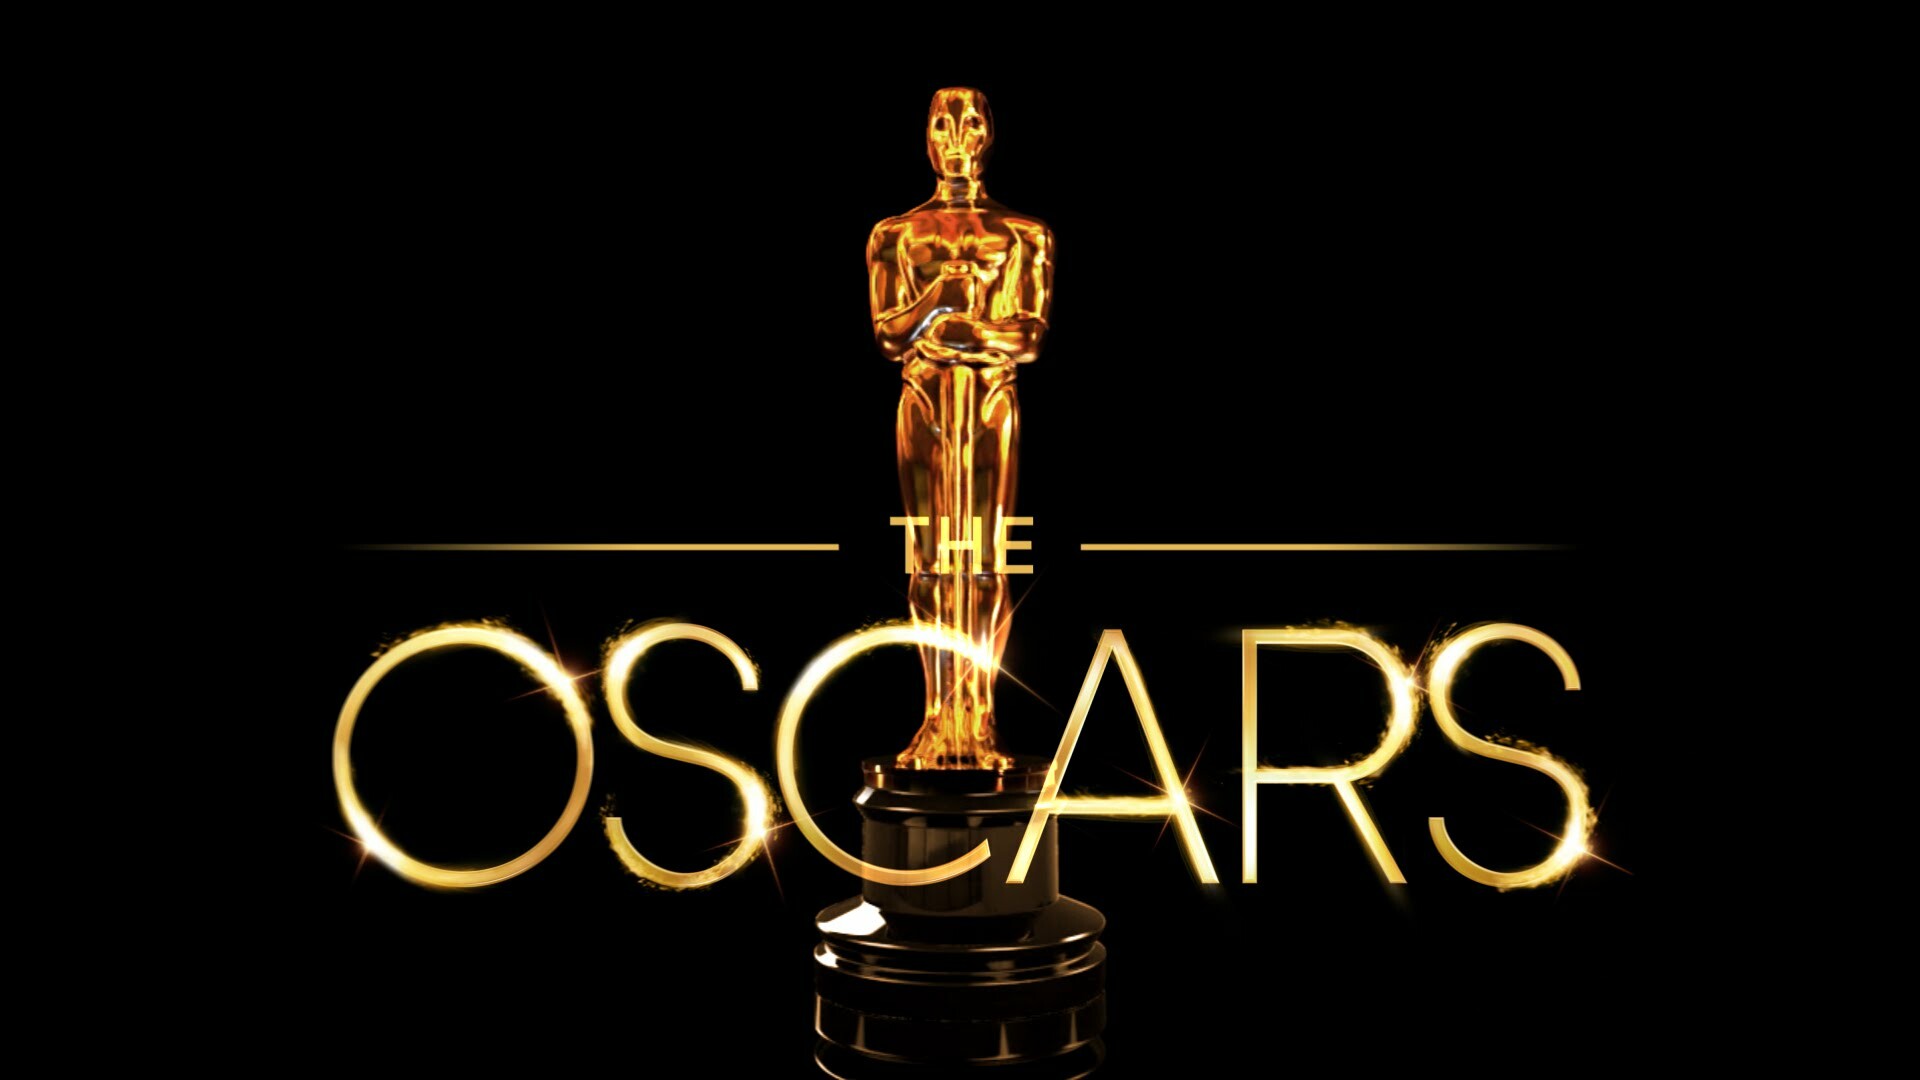 2021 and 2022 Oscars, Important dates, Celebration of cinema, Recognizing excellence, 1920x1080 Full HD Desktop